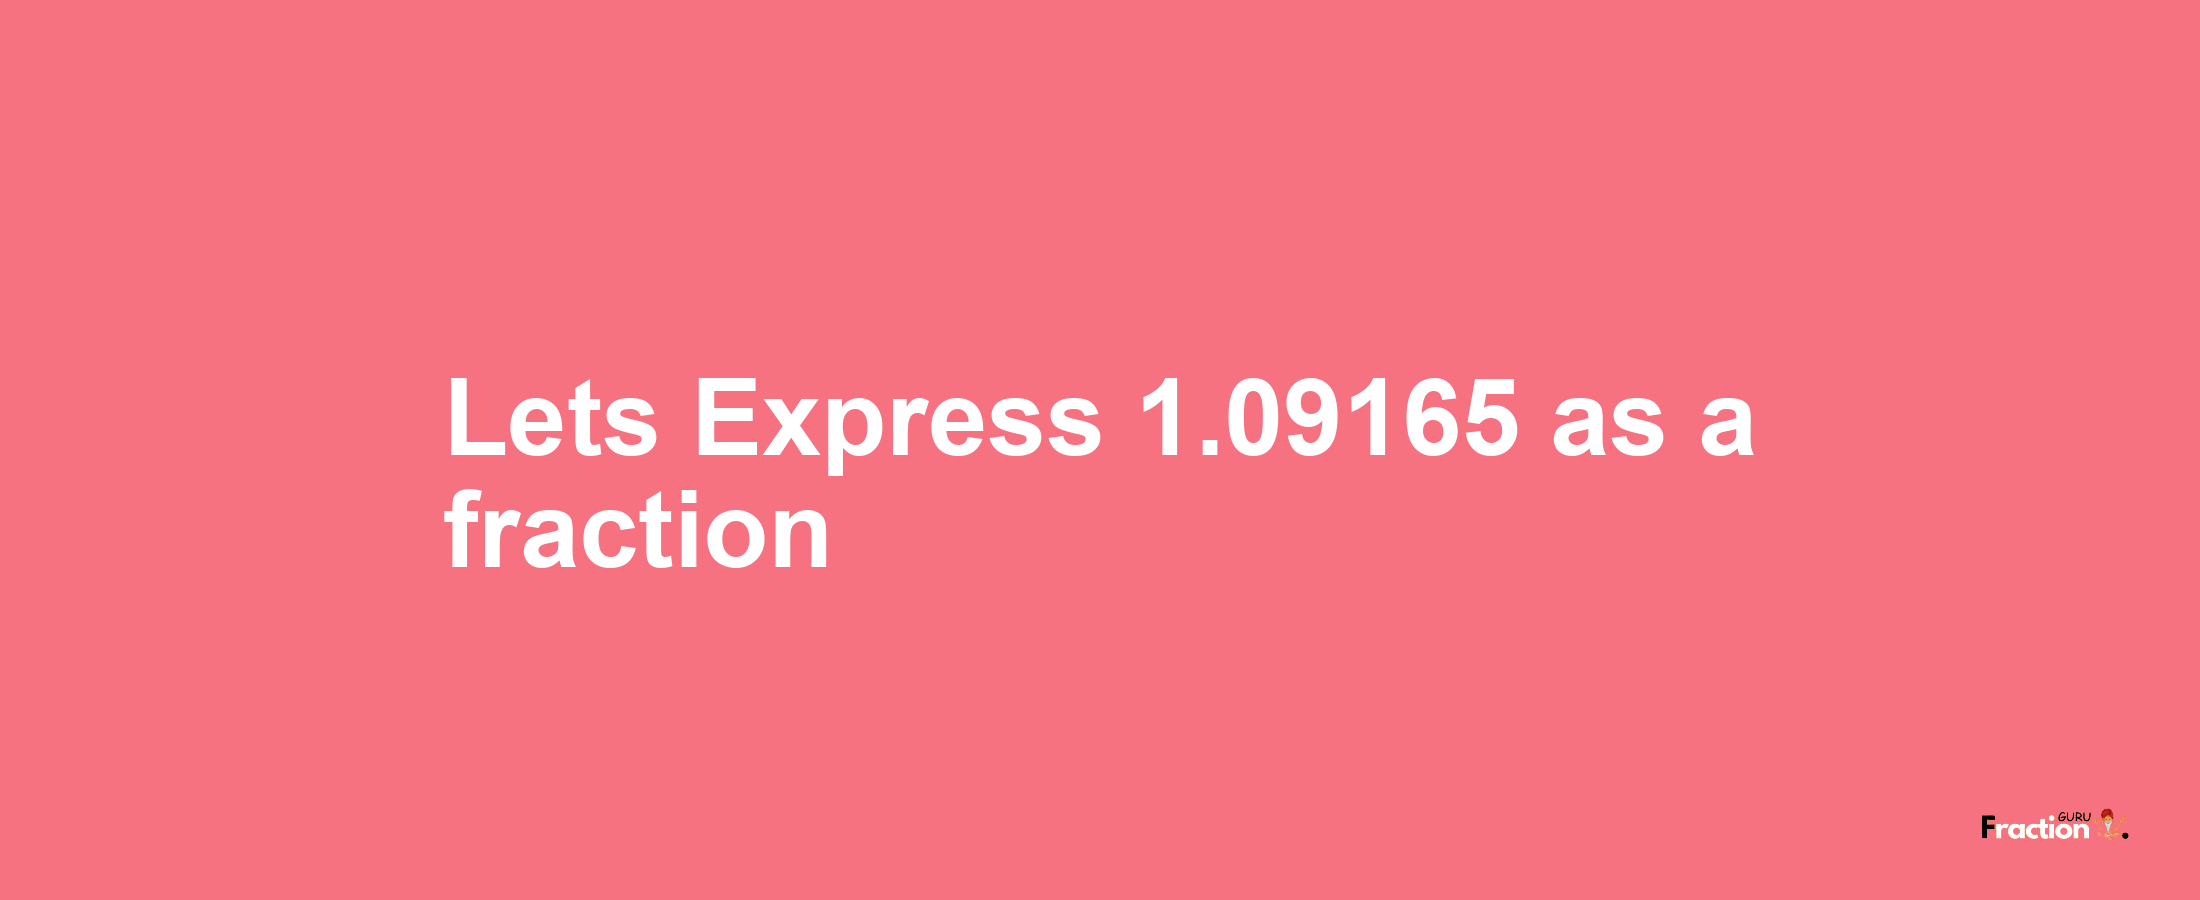 Lets Express 1.09165 as afraction